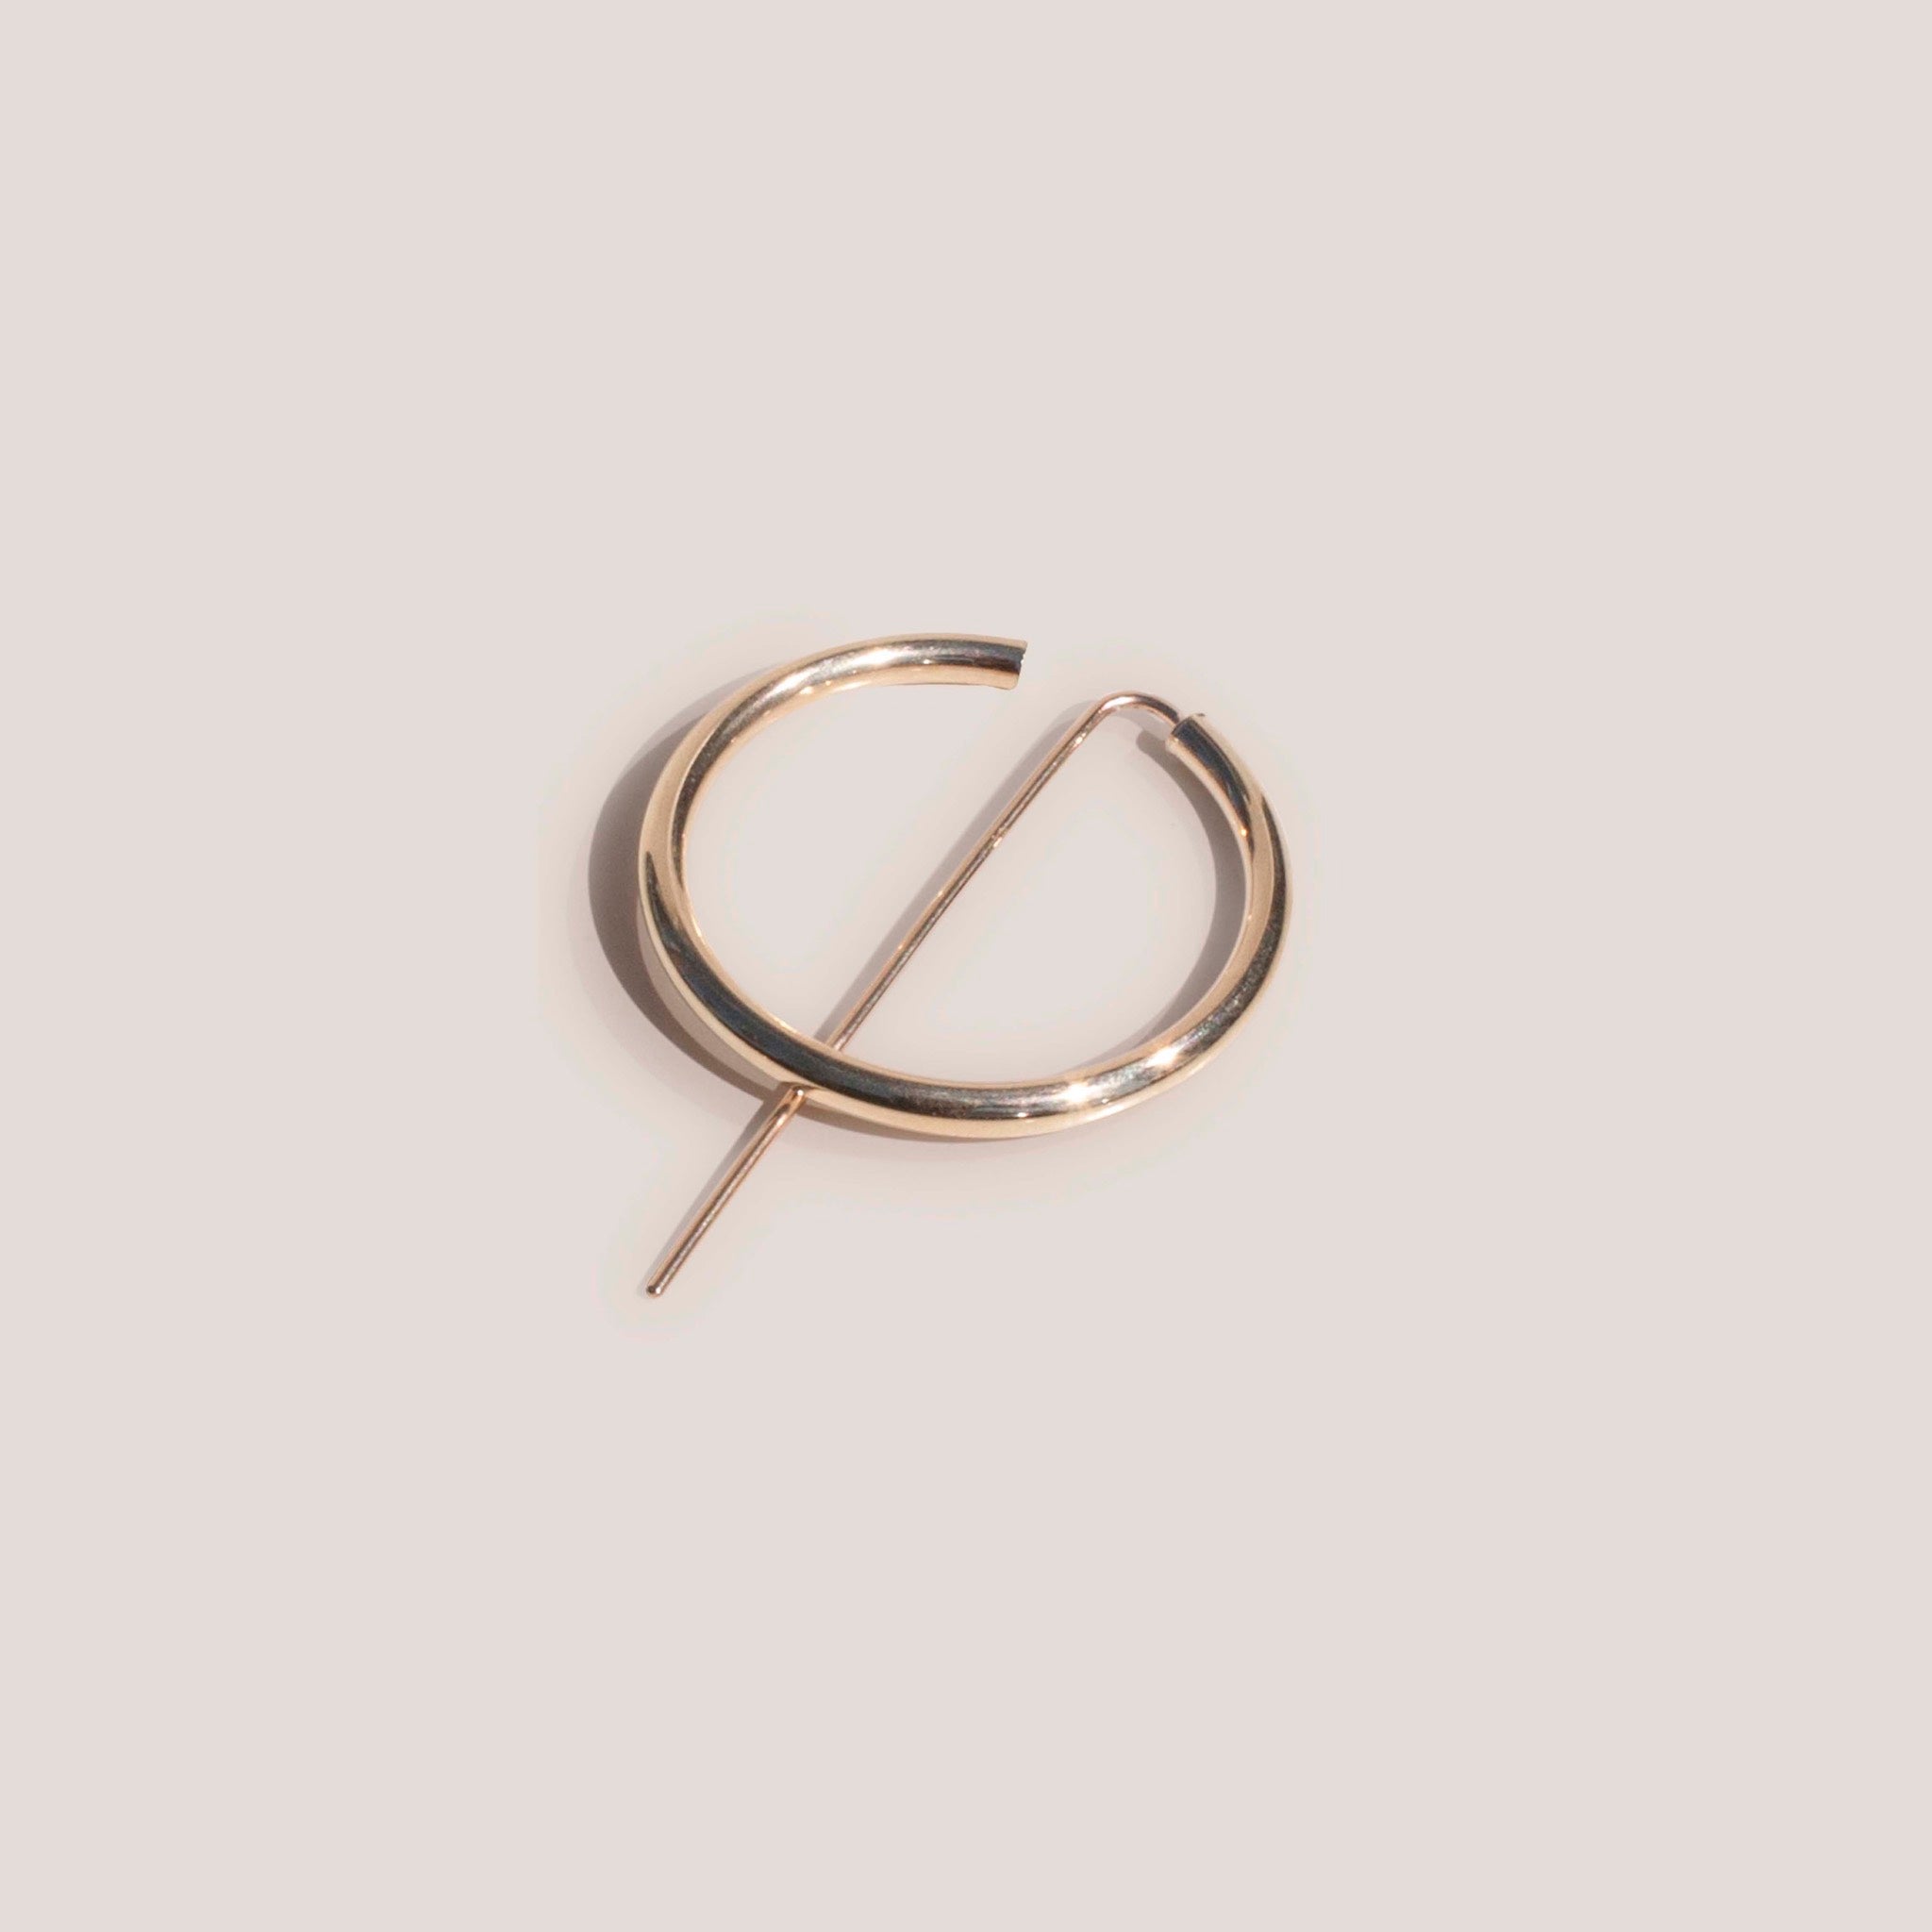 Jaclyn Moran Jewelry - Hoop & Post Earrings in Yellow Gold, available at LCD.